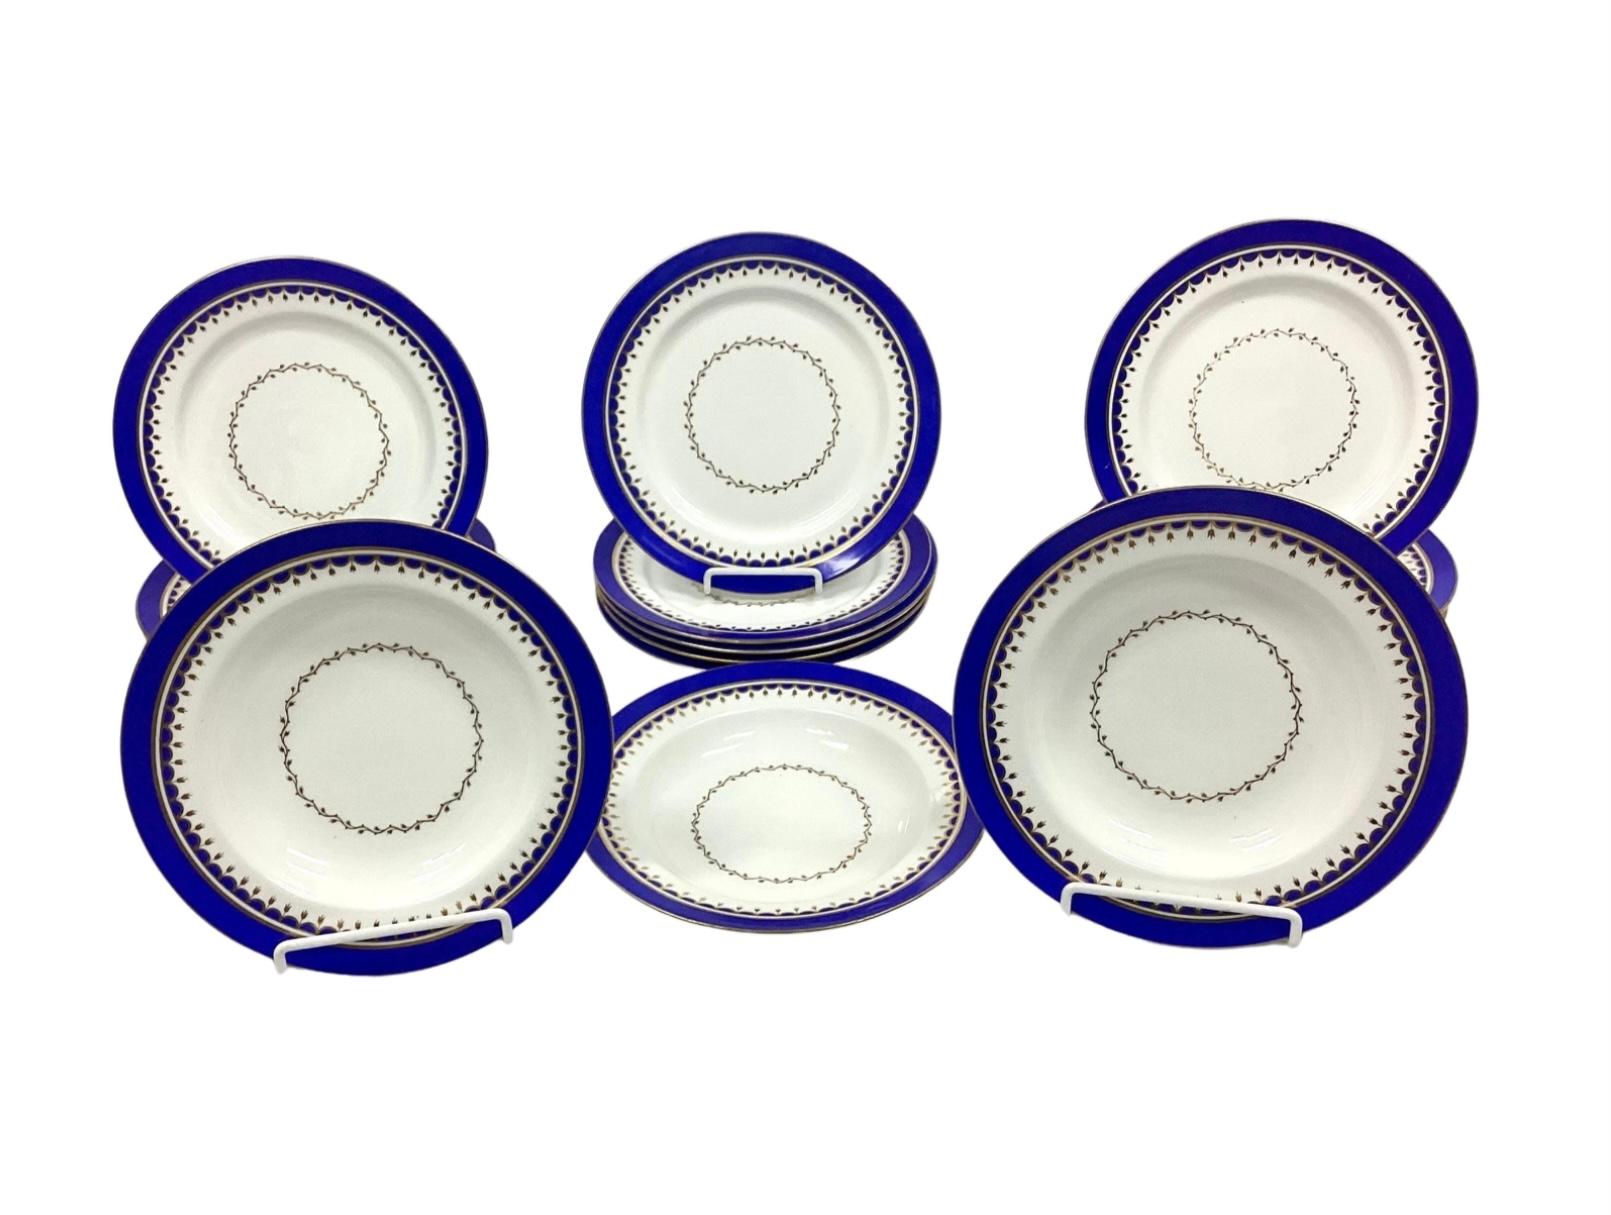 Set of Vintage Porcelain Dinner Plates and Bowls, Early 20th Century For Sale 7